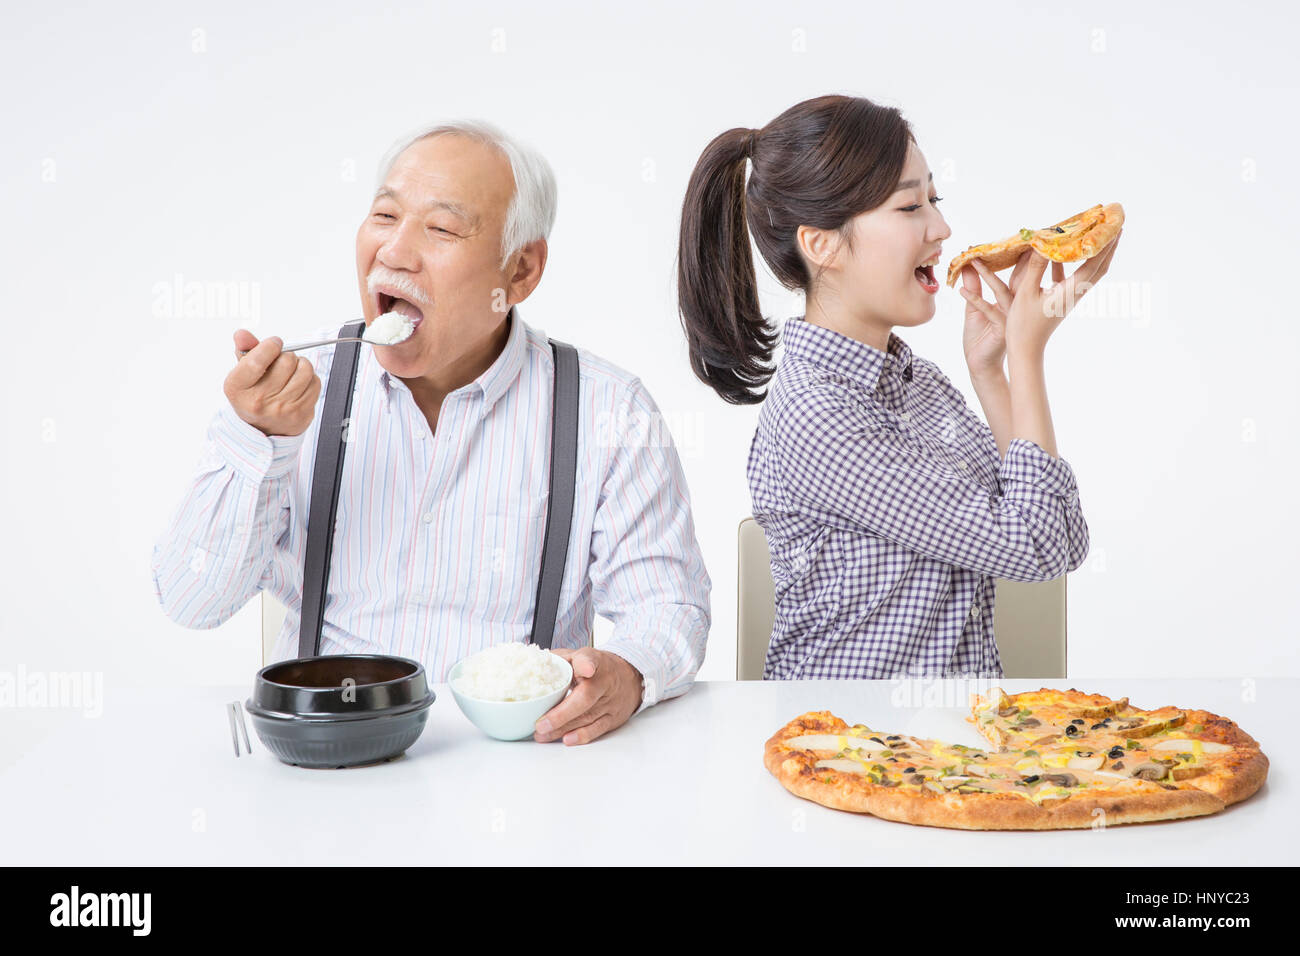 Senior man eating rice and young woman eating pizza Stock Photo